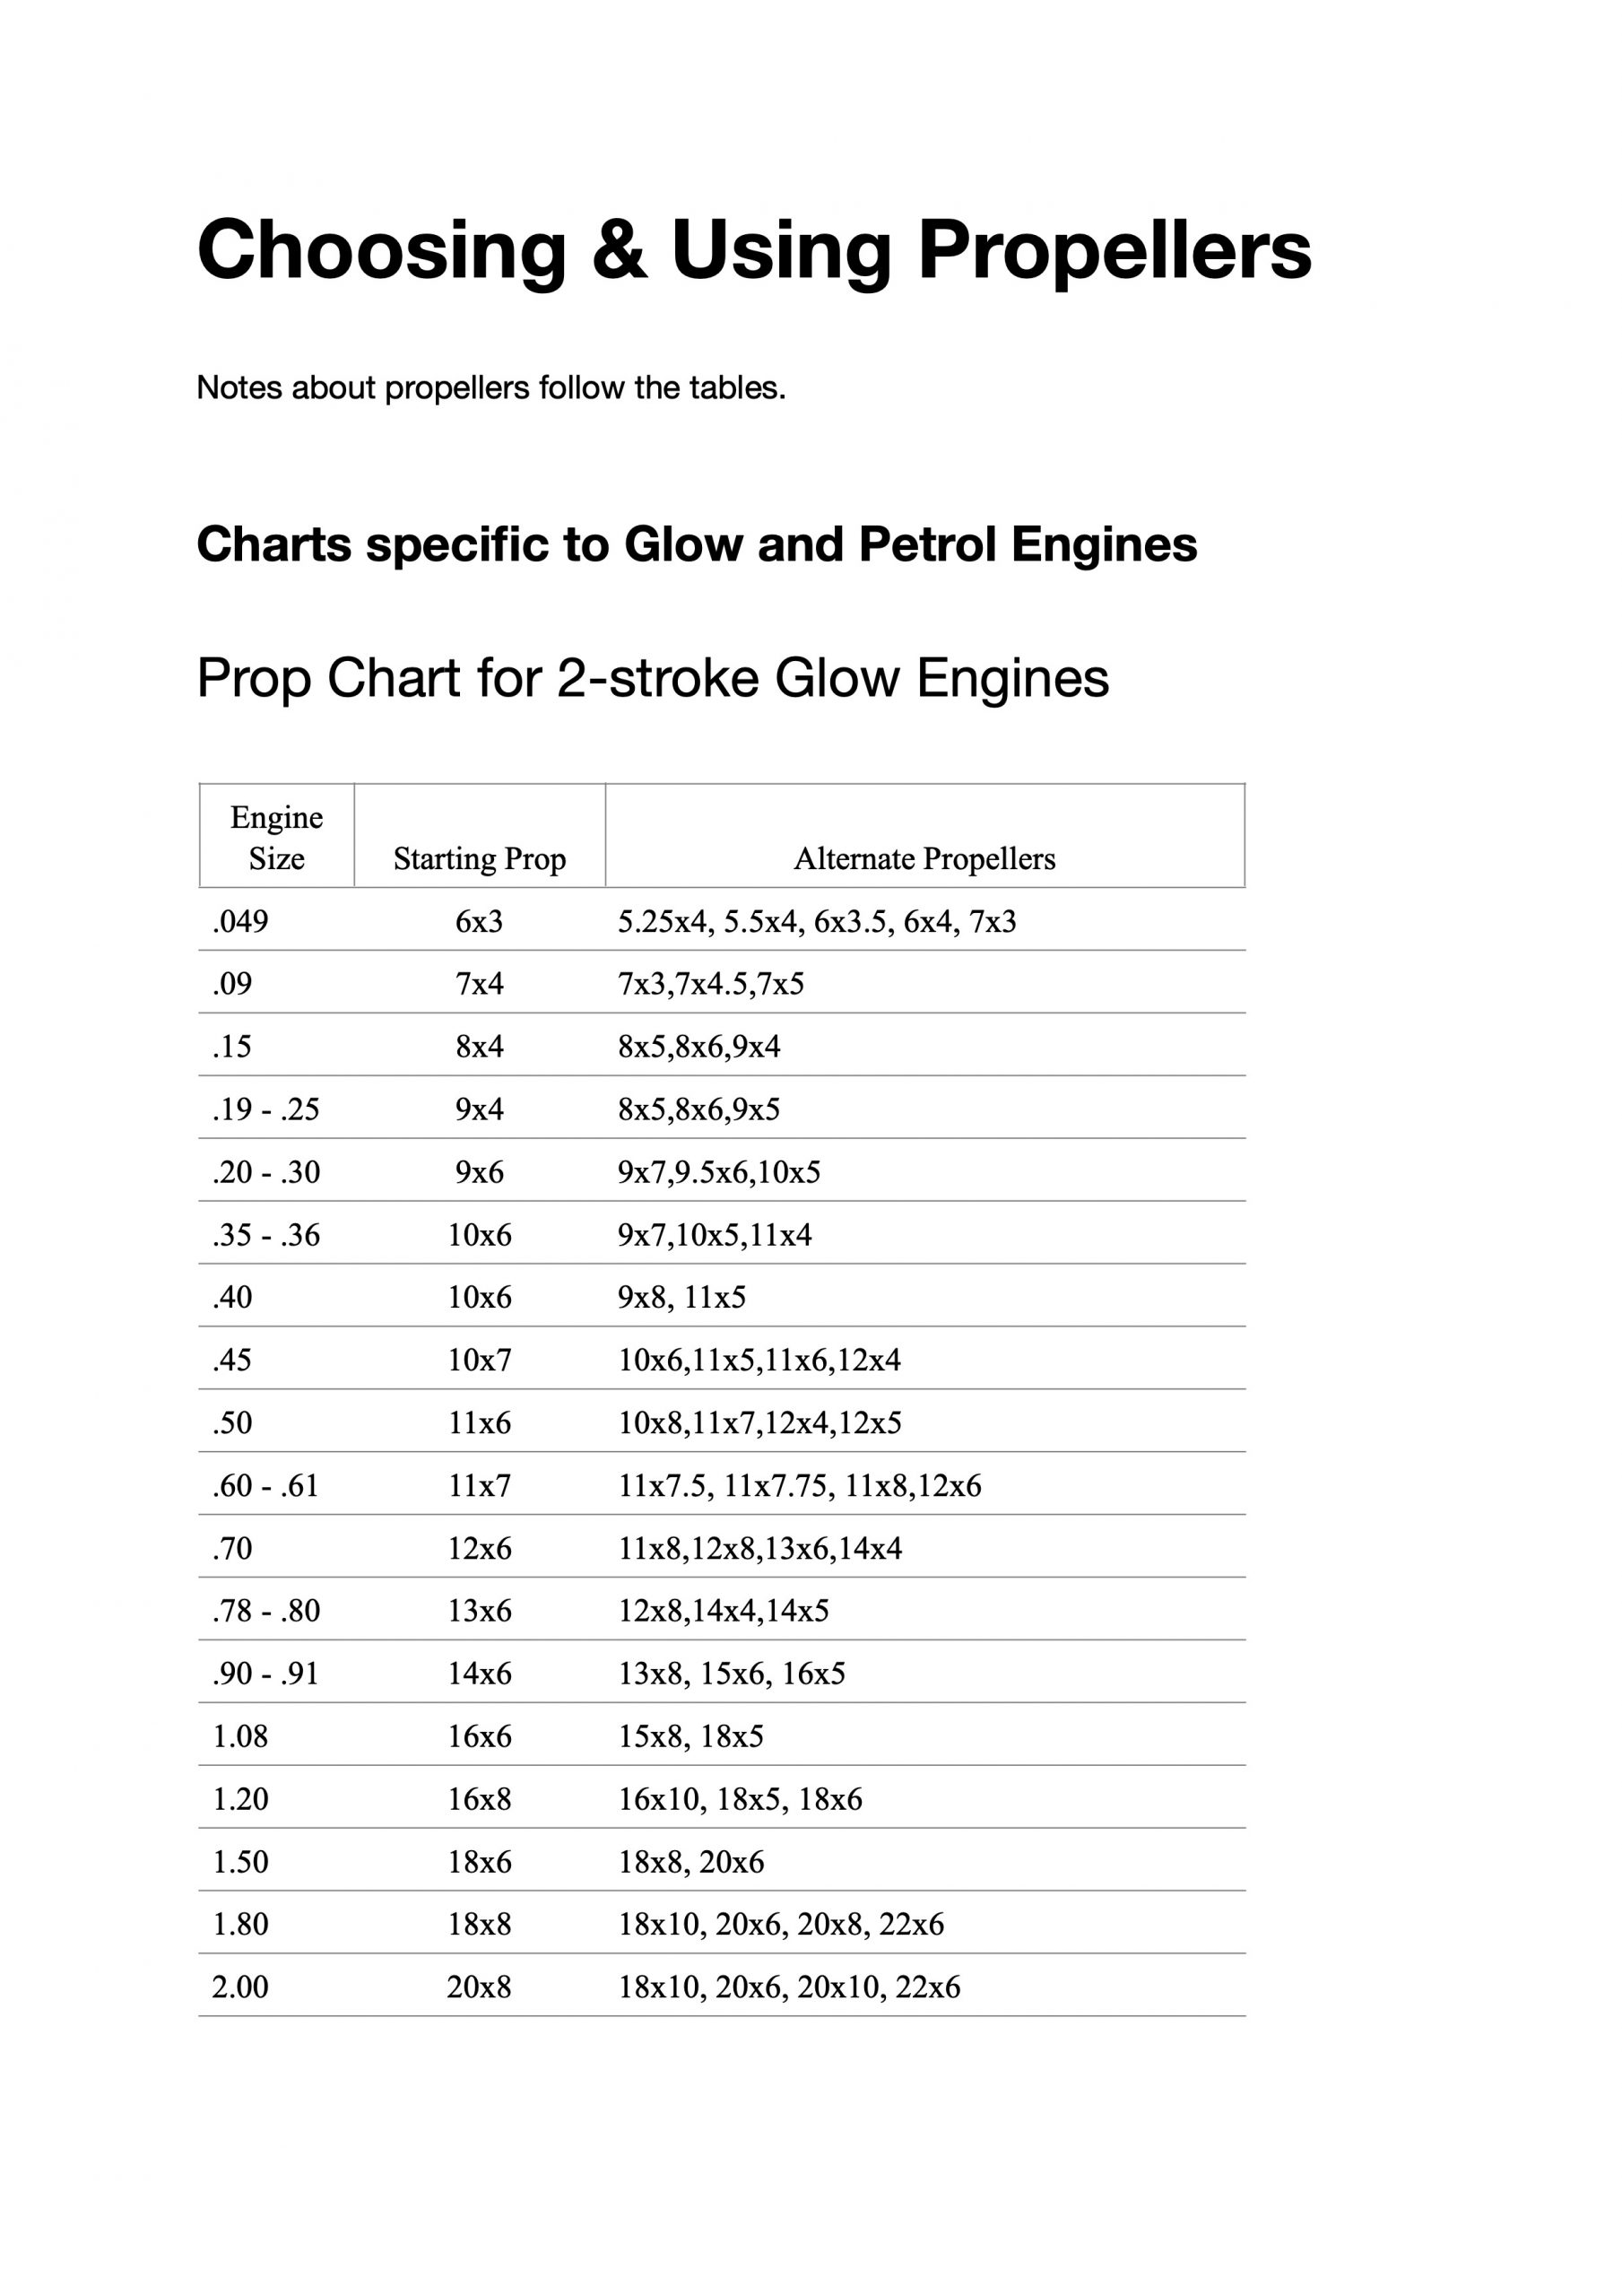 Kevin Hunt, glow and petrol engine prop selection